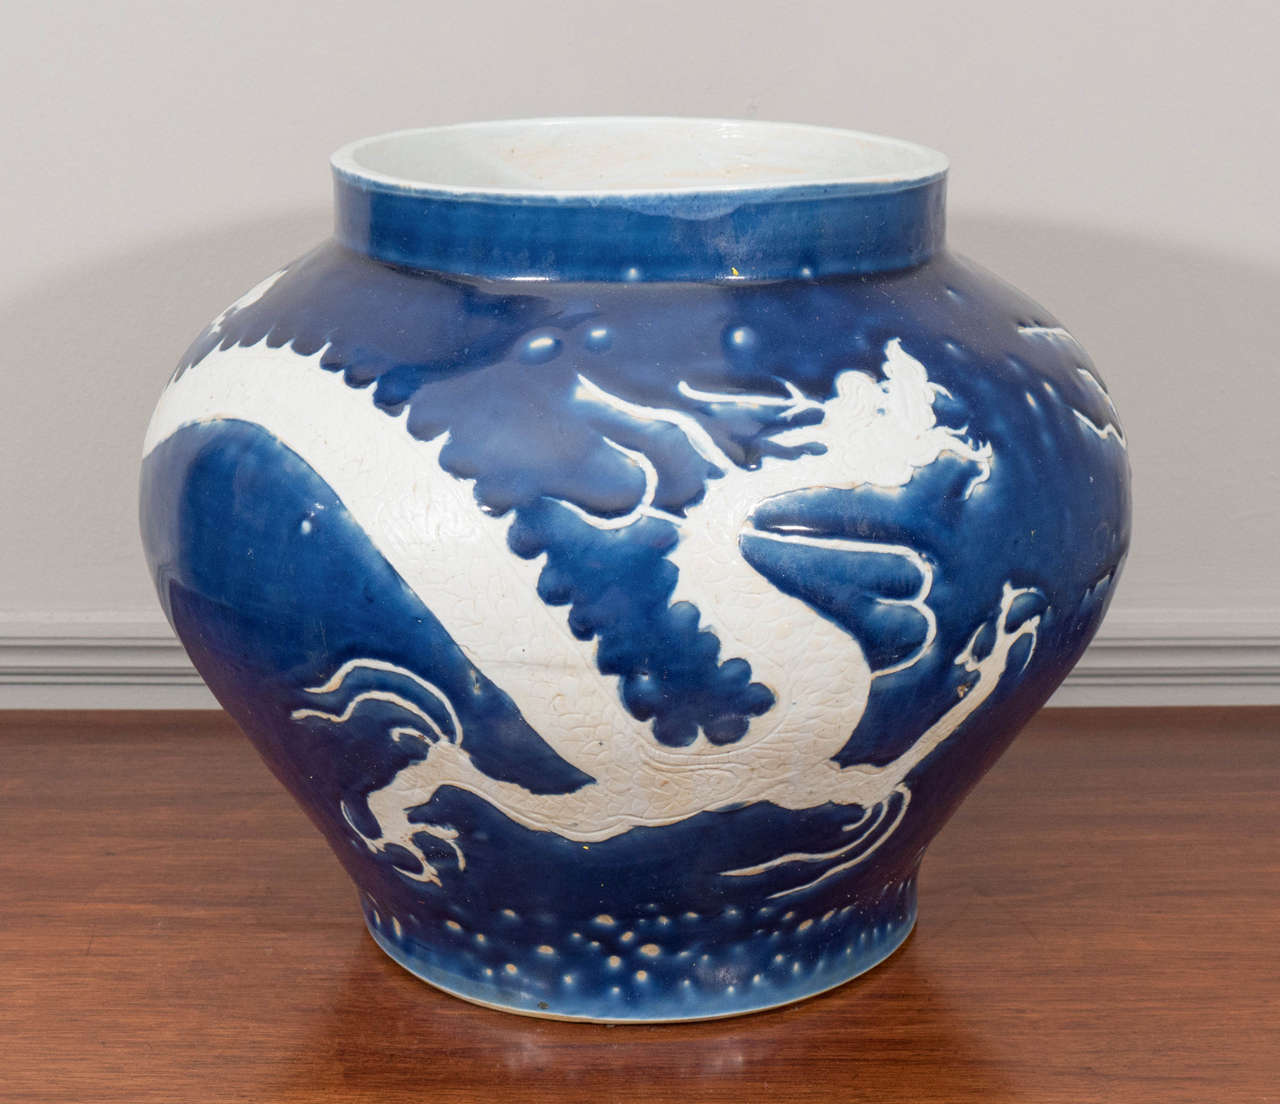 Pair of blue and white Chinese porcelain cachepots with dragon motif.